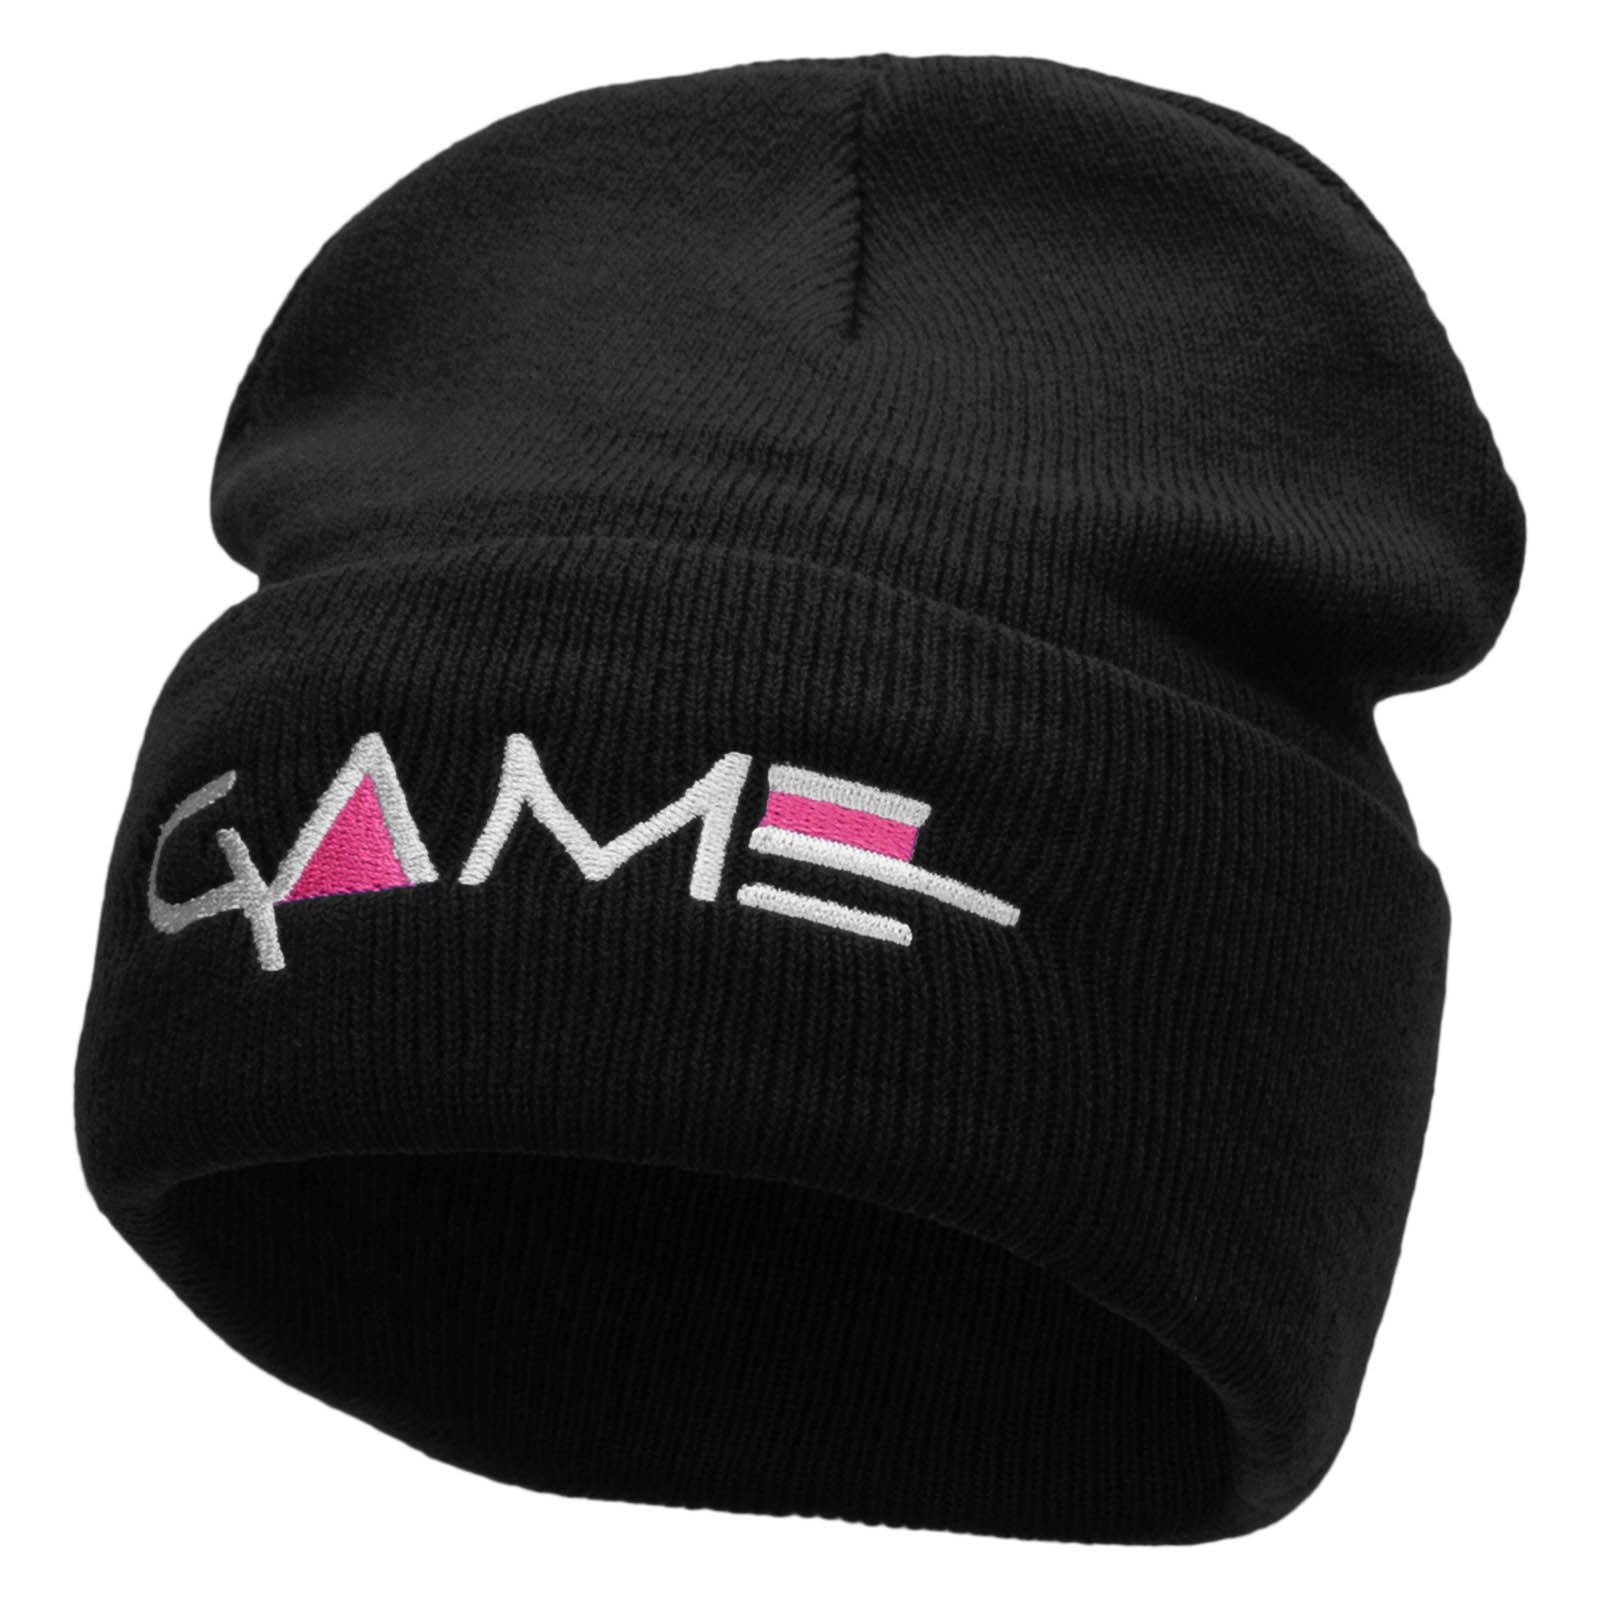 Game Embroidered 12 Inch Long Knitted Beanie - Black OSFM